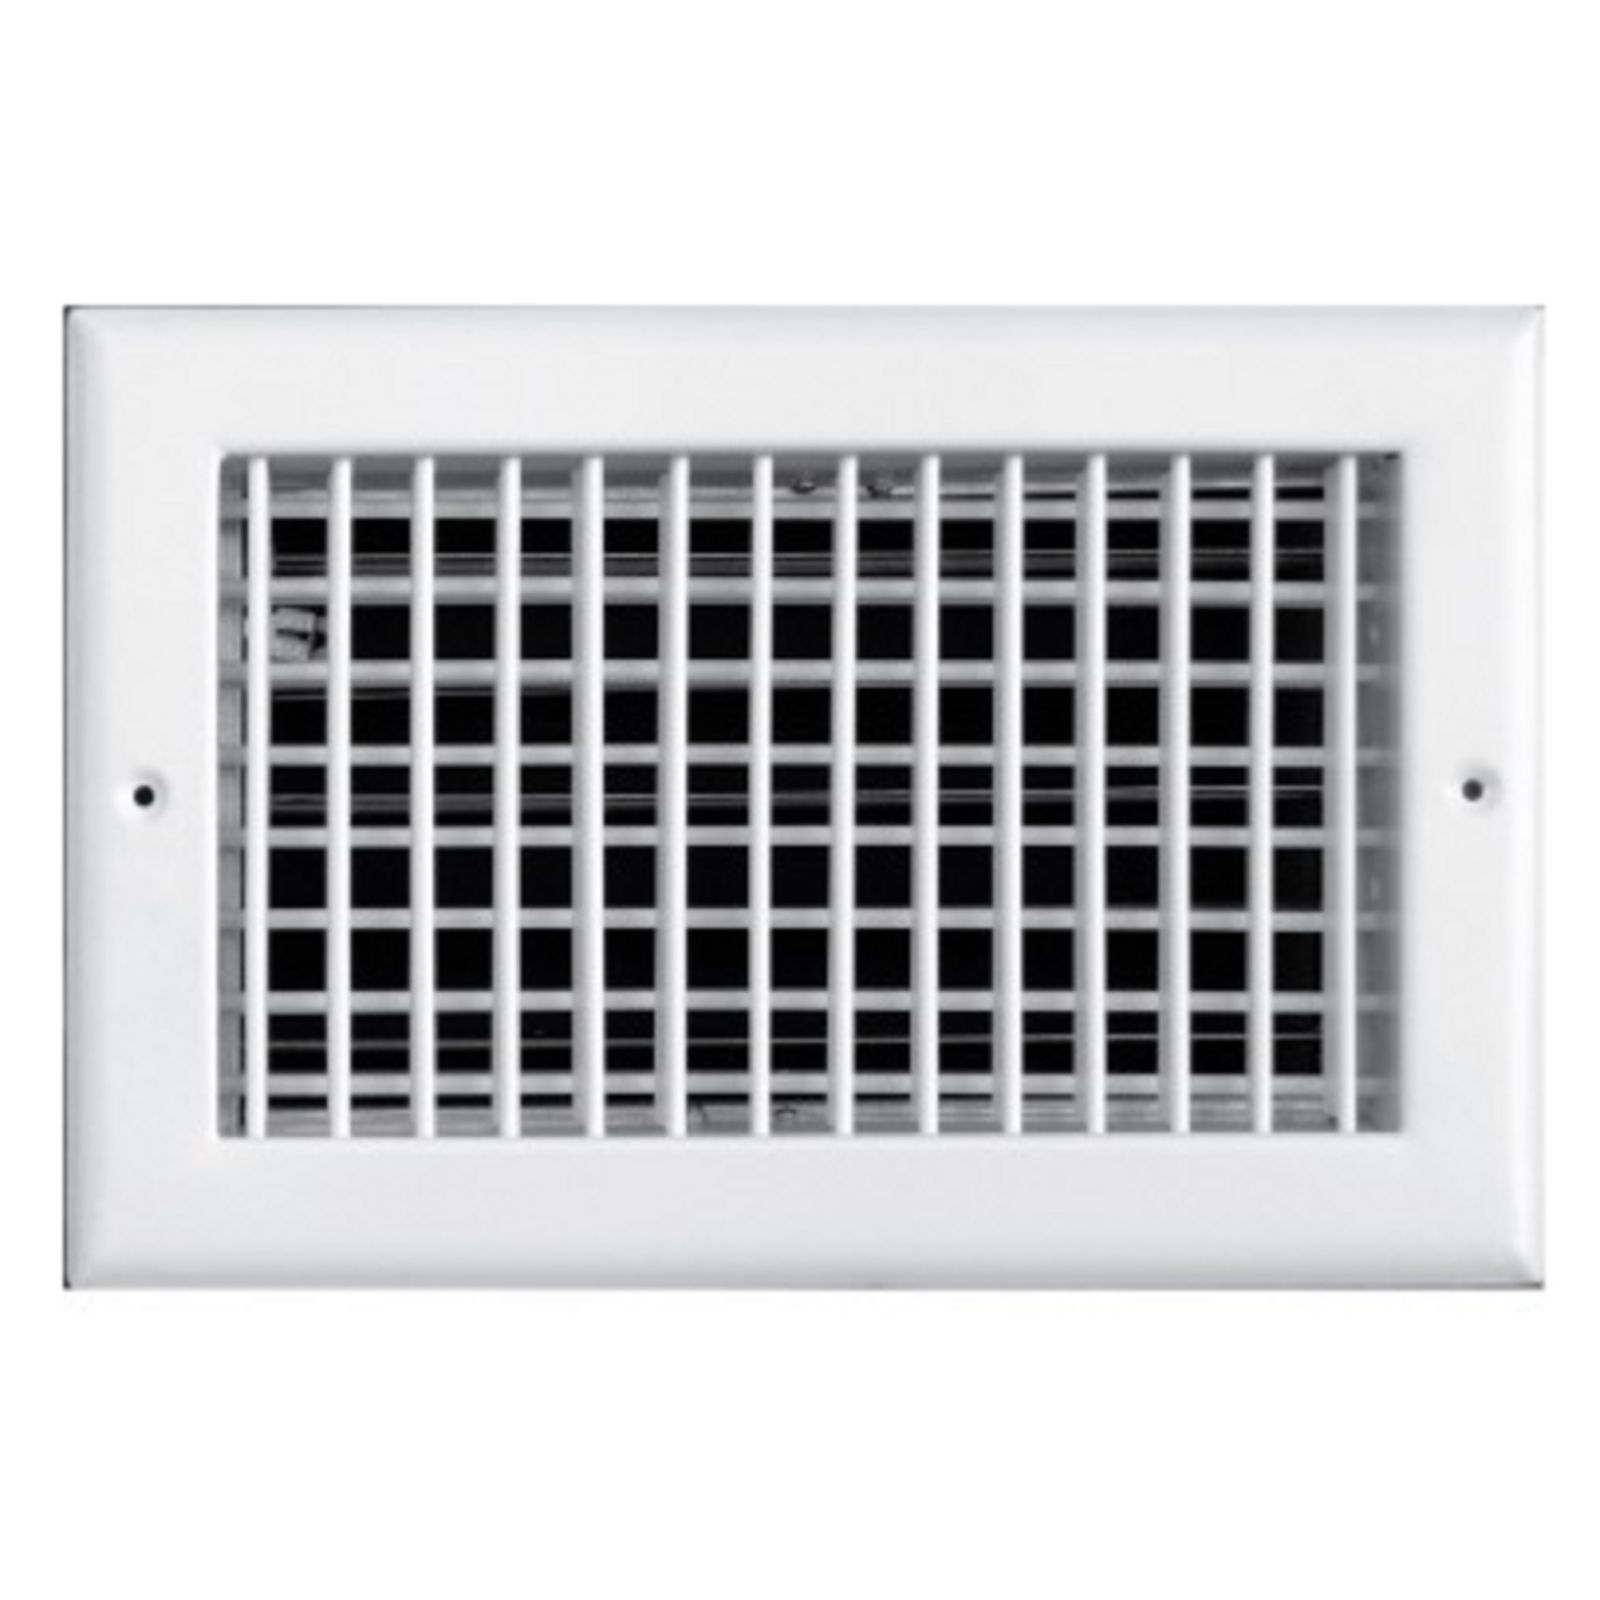 TRUaire 220VO 06X06 - Steel Adjustable Double Deflection Wall/Ceiling Register With Opposed Blade Damper, White, 06" X 06"